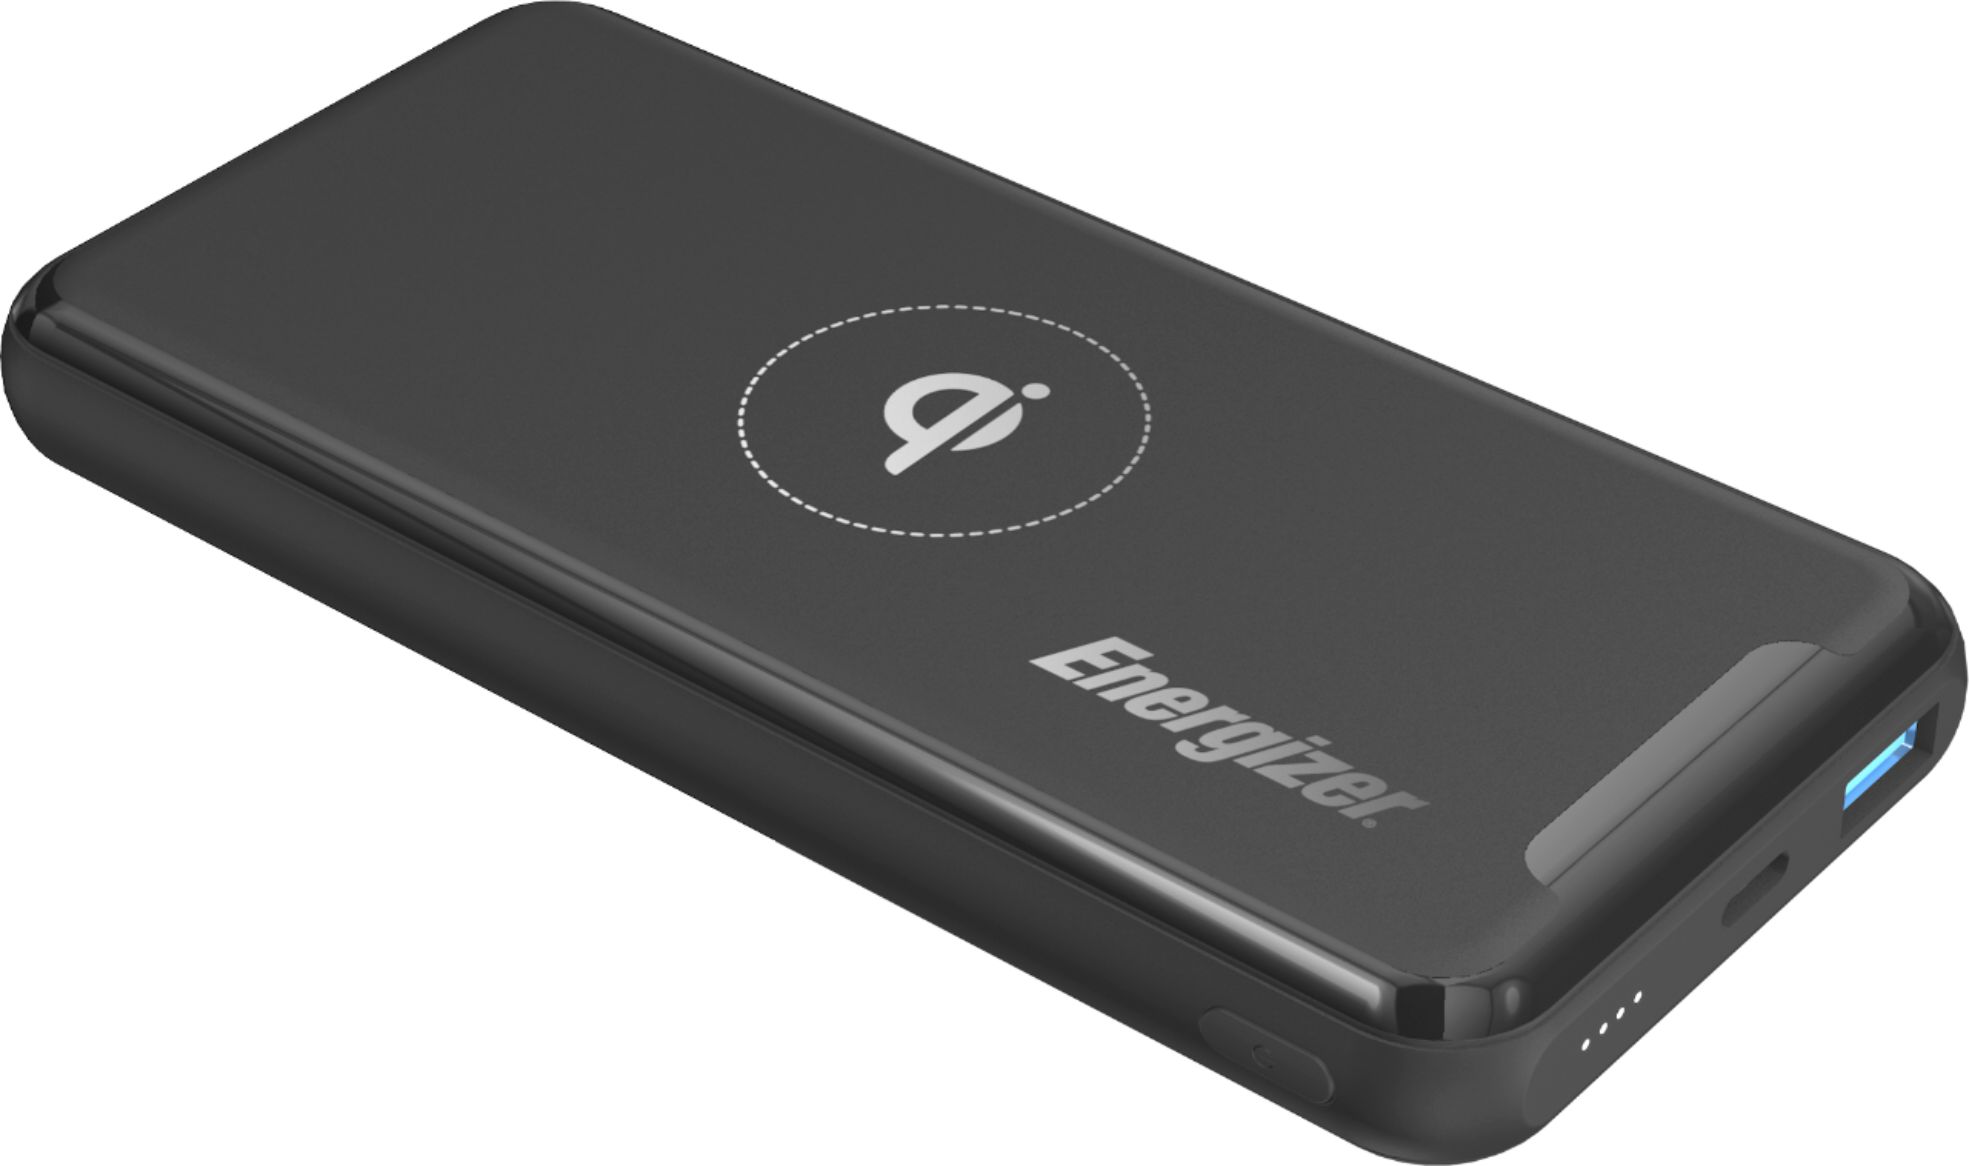 Energizer Ultimate Lithium 10,000mAh 20W Qi Wireless Portable Charger/Power Bank QC 3.0 & PD 3.0 for Apple, Android, USB Devices Black - Best Buy